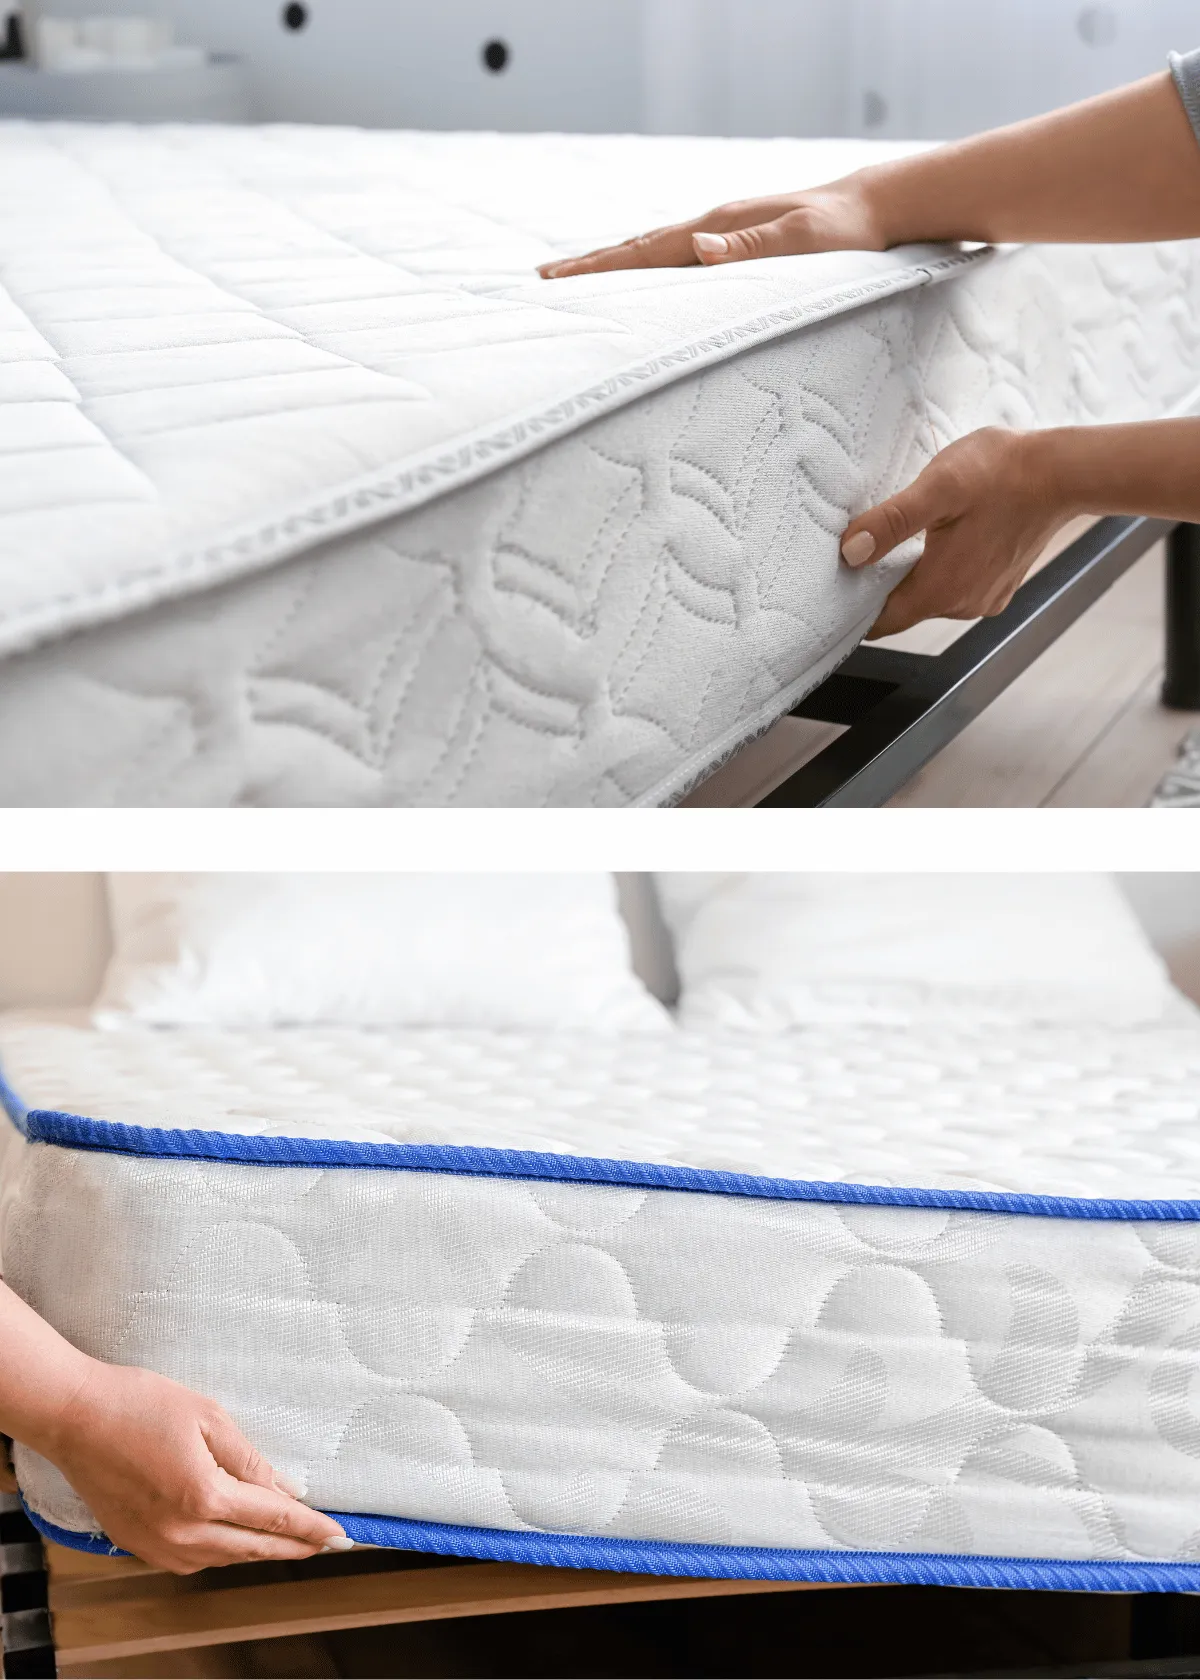 “How Often Should You Rotate Your Mattress For Optimal Sleep”